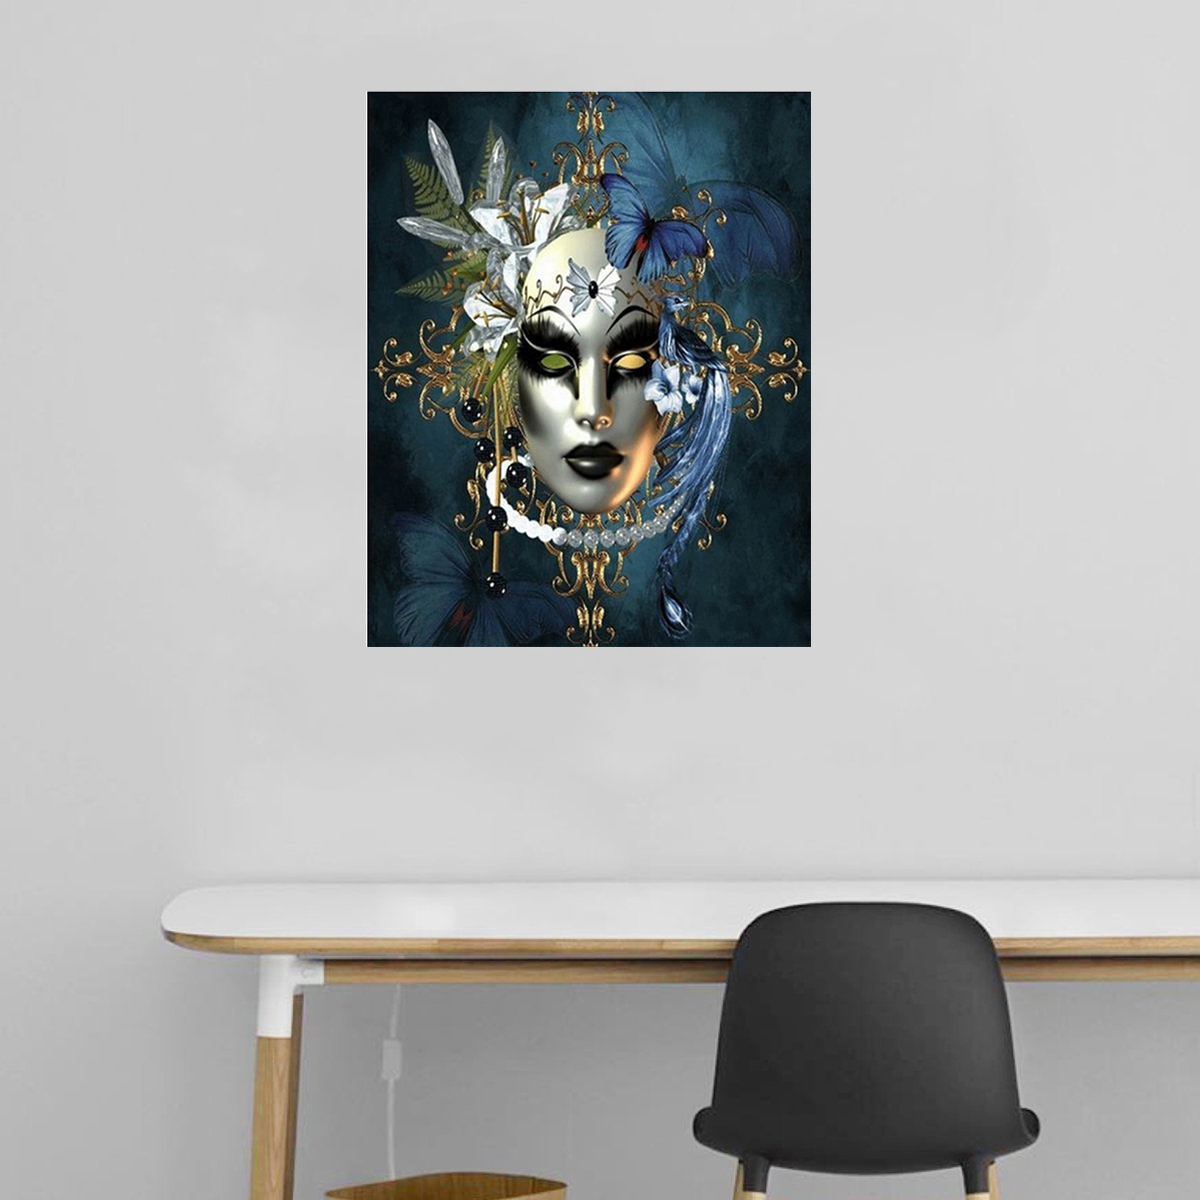 DIY-Diamond-Painted-Mask-5D-Diamond-Wall-Painting-Bedthroom-Home-Hanging-Drawing-Decoration-for-Adul-1744078-12